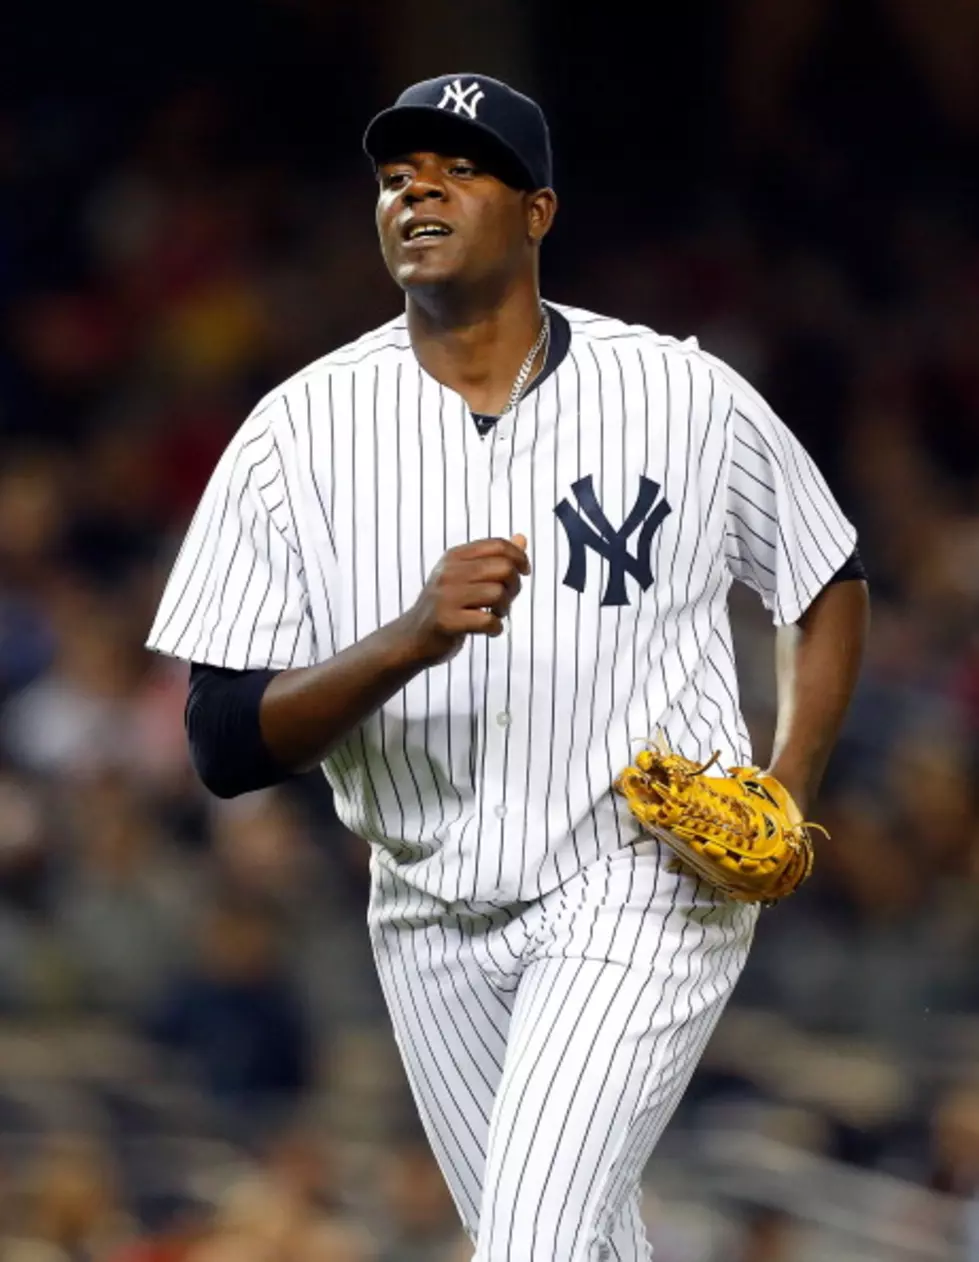 Yankees And Marlins Move To New York [PREVIEW]